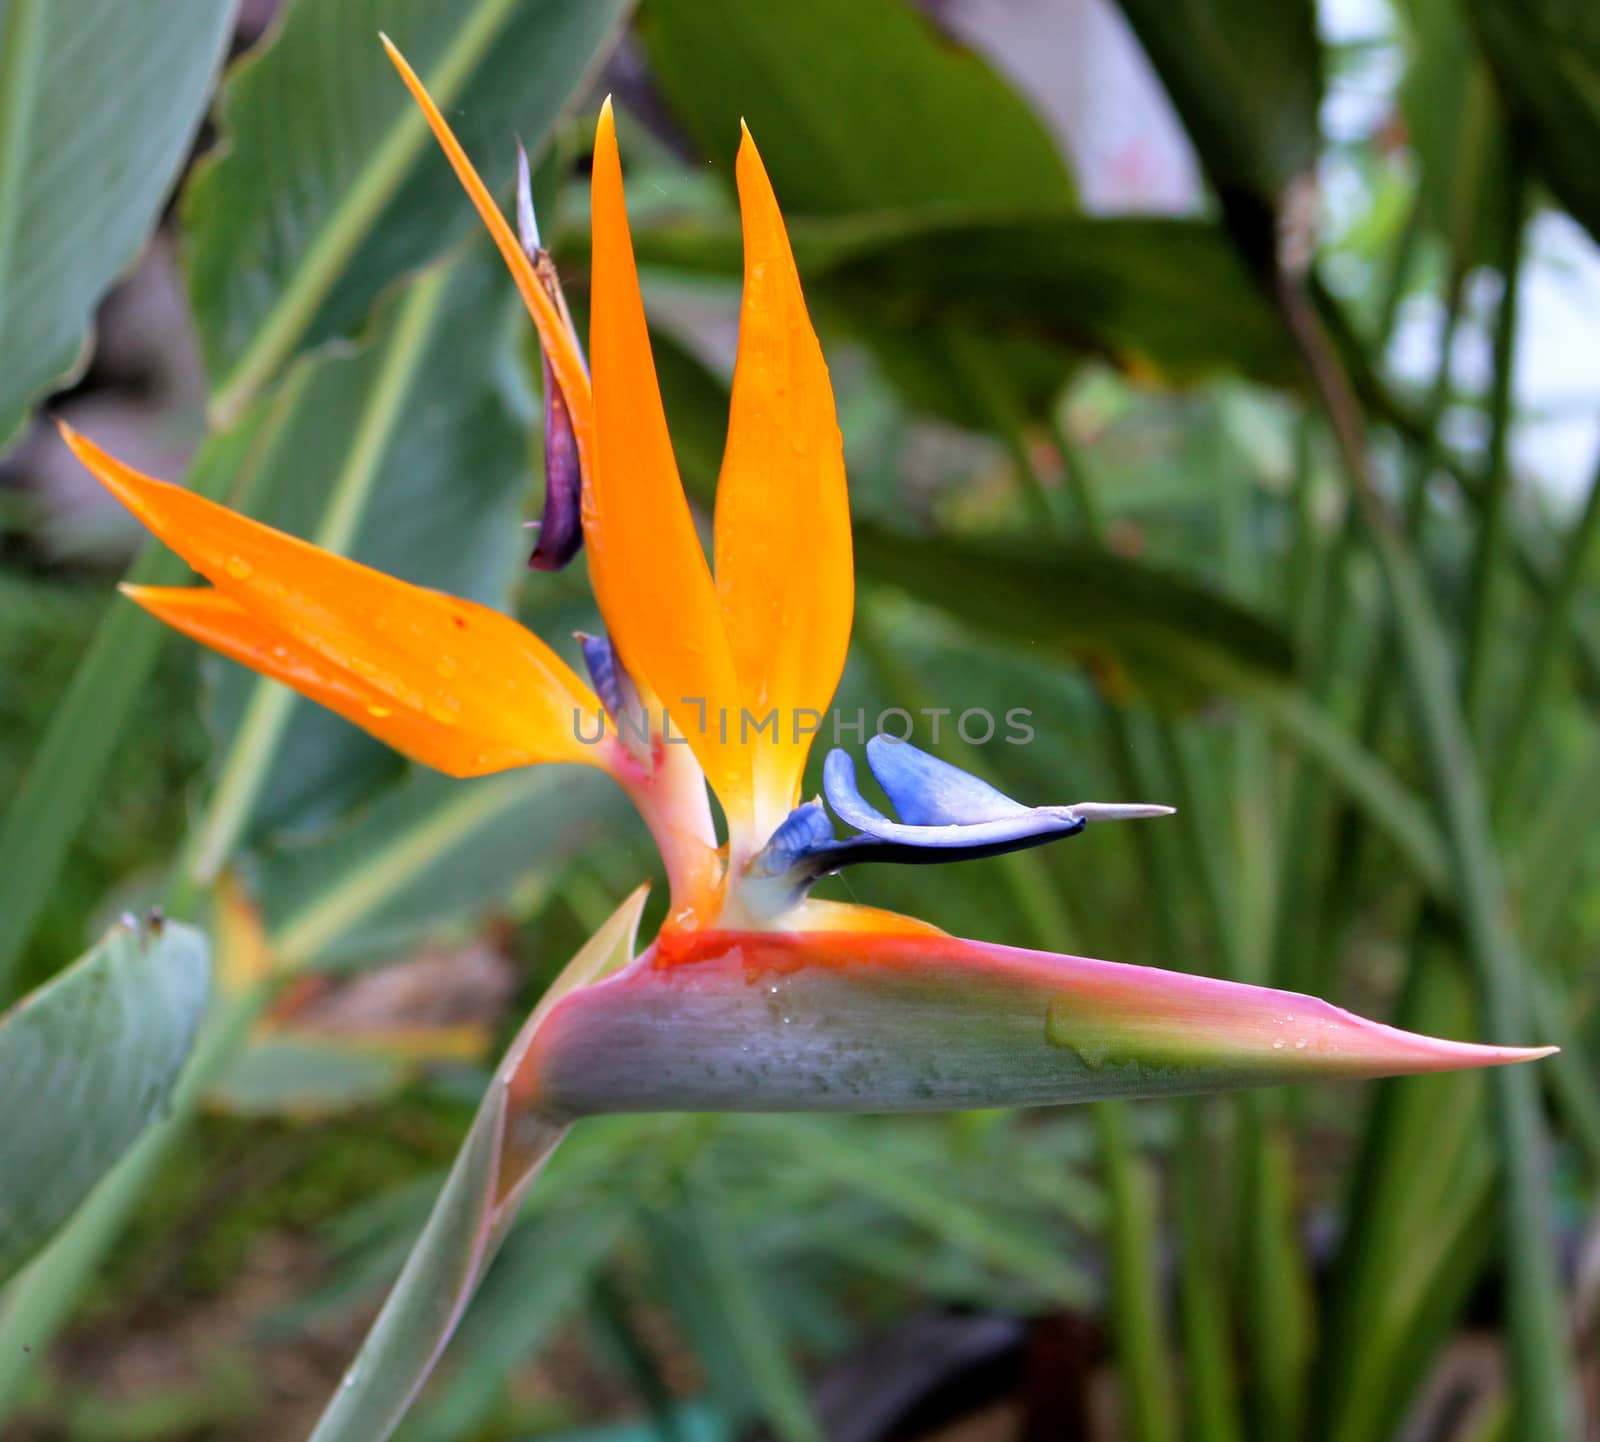 Profile of a stunning Strelitzia Reginae (commonly known as Bird of Paradise Flower) after a tropical rain in the Mayan Riviera, Mexico